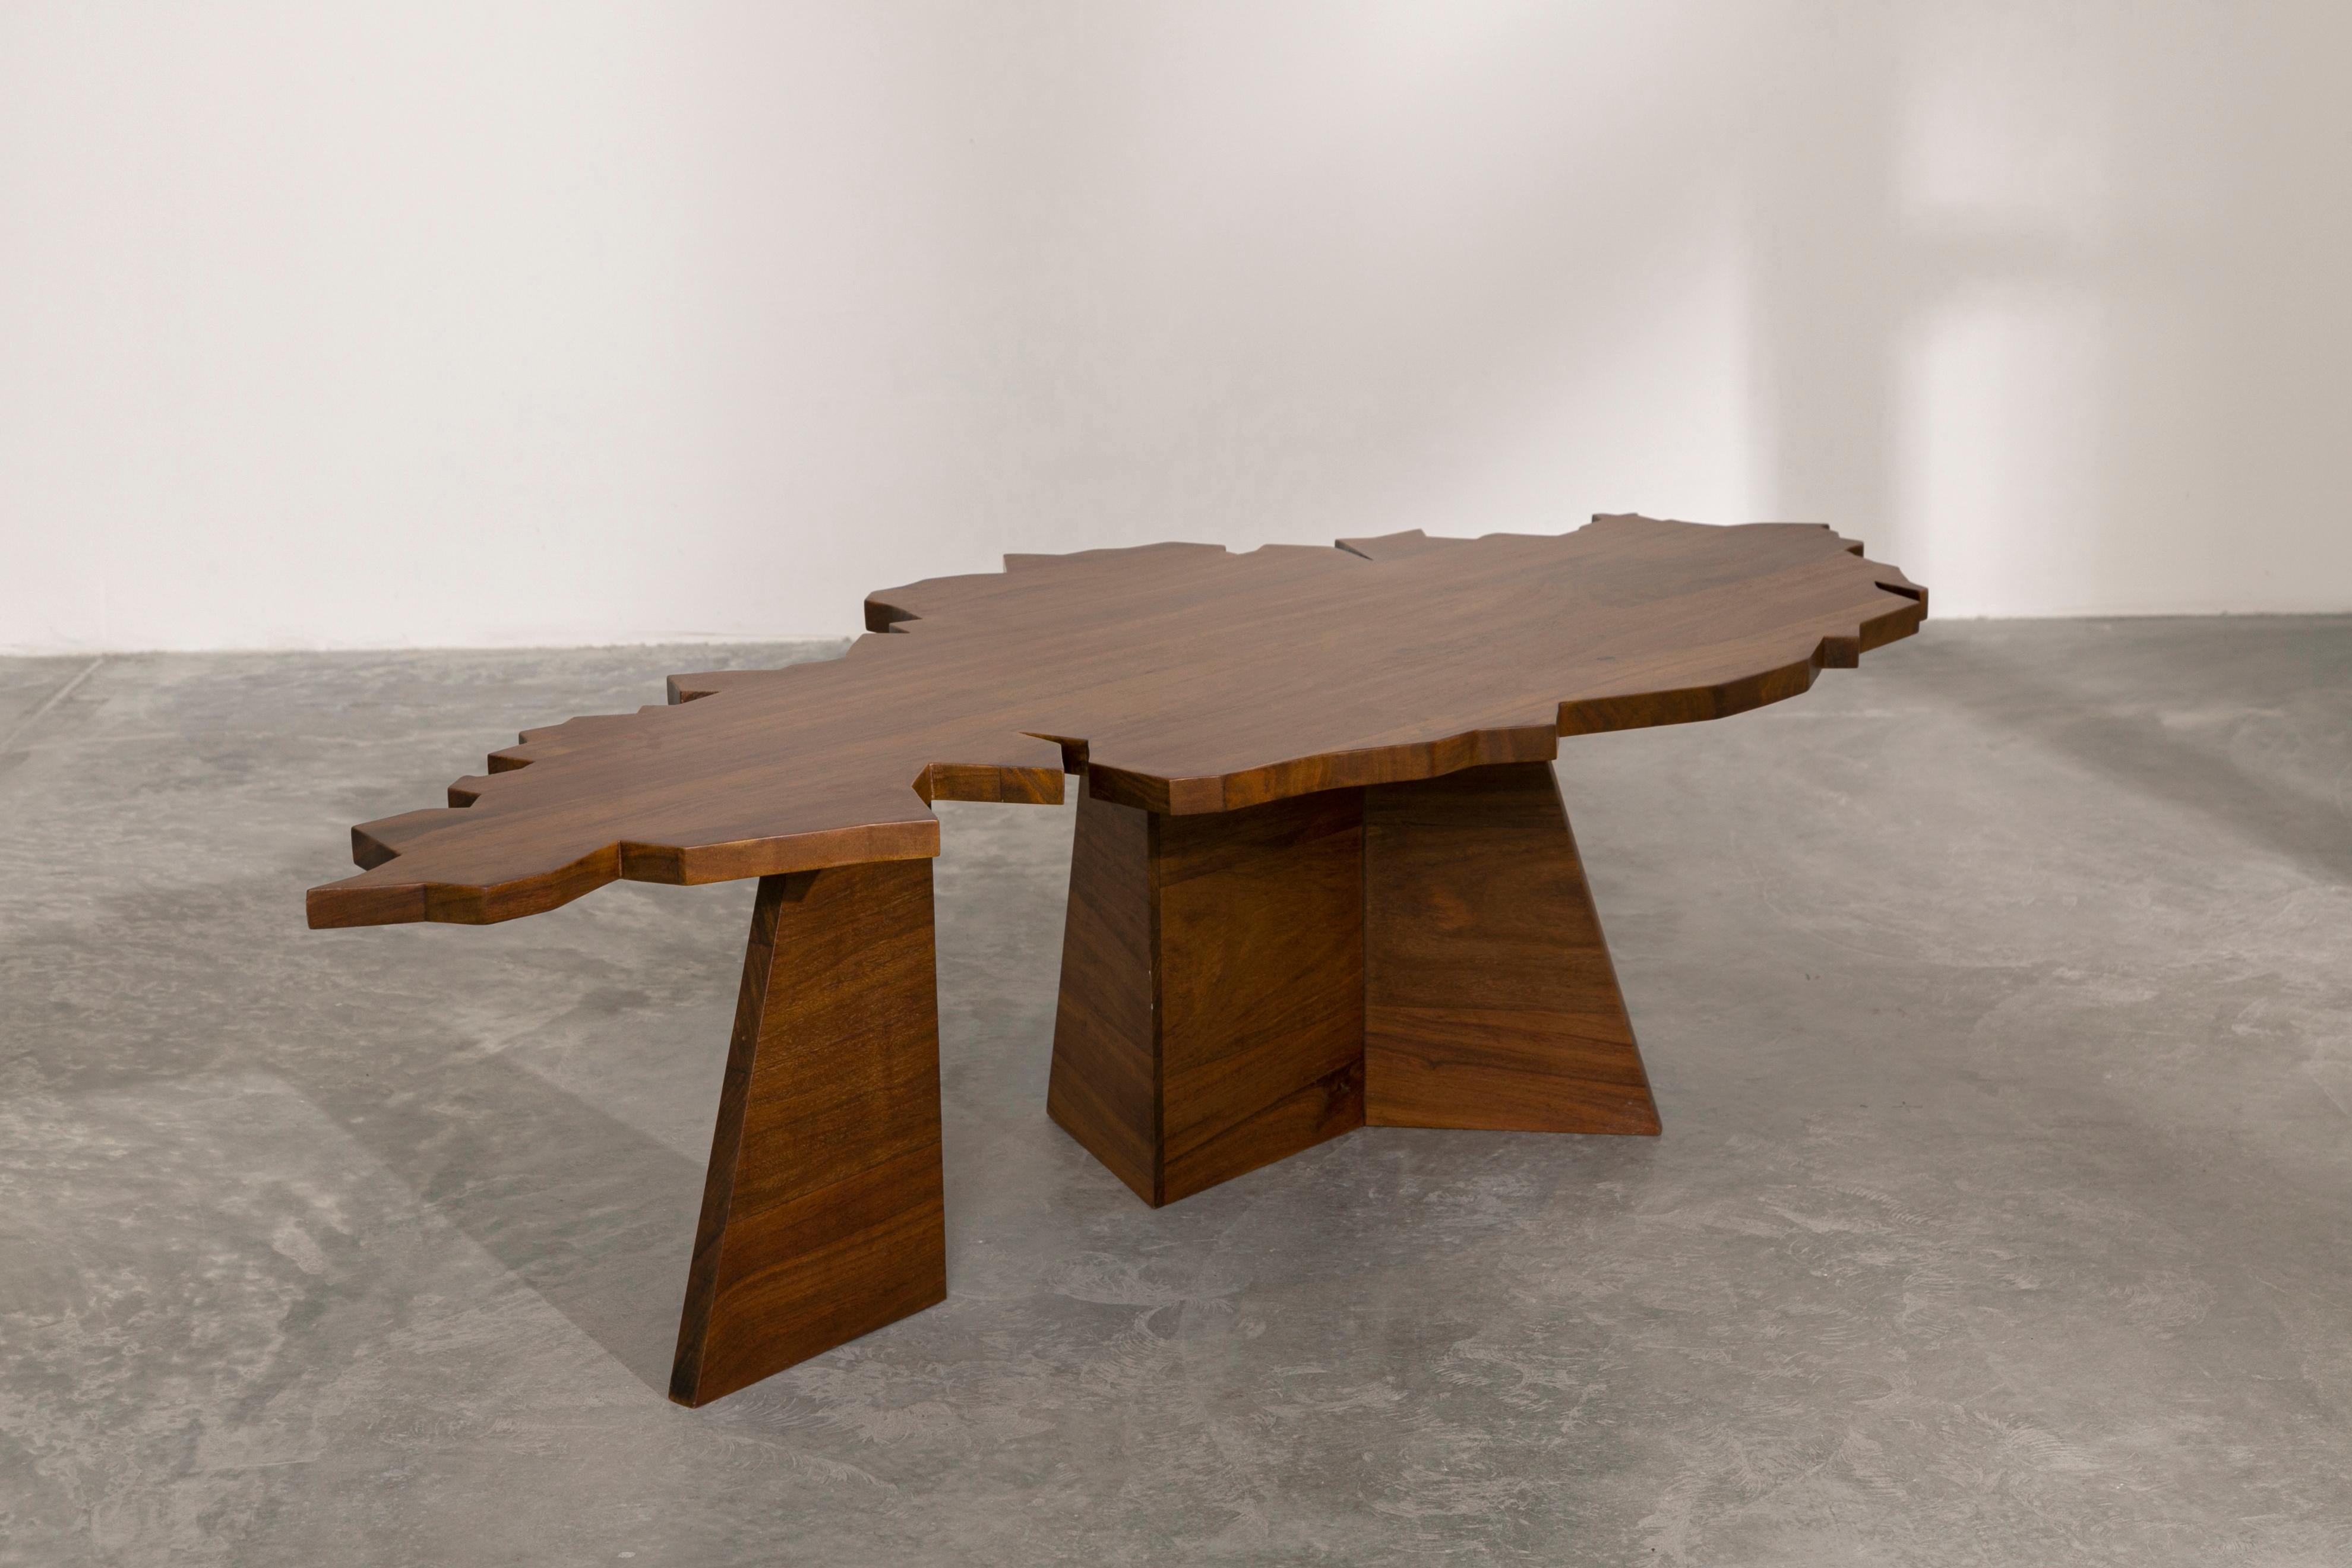 Leaf table by Sofia Alvarado
Dimensions: D 150 x W 70 x H 40 cm
Materials: Zapatero wood
Limited Edition 1/10

FI is an ornamental artist who embodies the creative revelation of the sensitivity of the innate being, with uninhibited freedom by